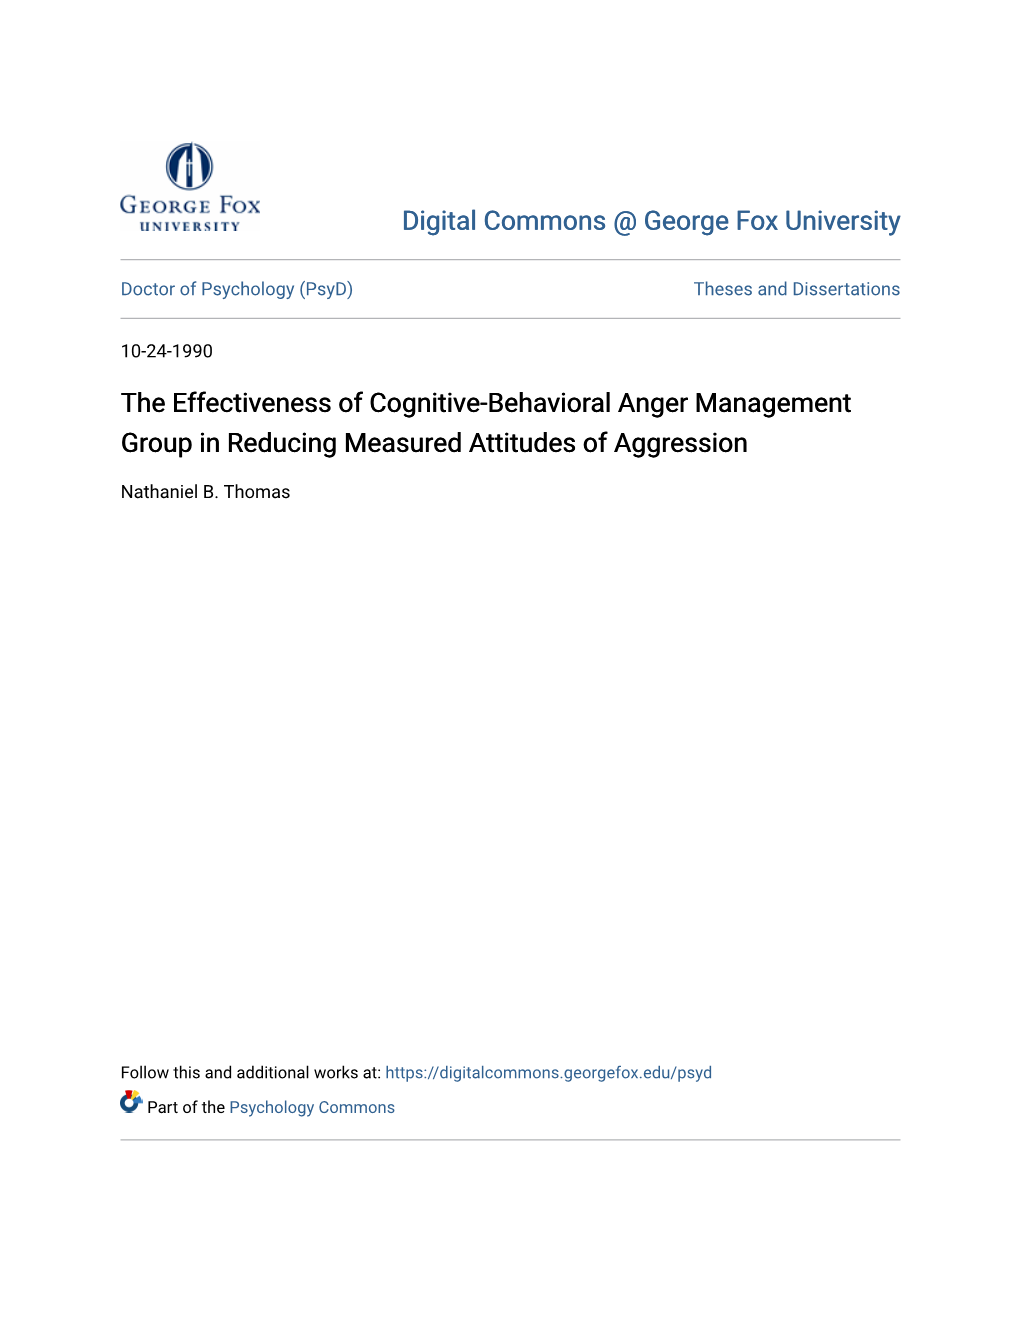 The Effectiveness of Cognitive-Behavioral Anger Management Group in Reducing Measured Attitudes of Aggression